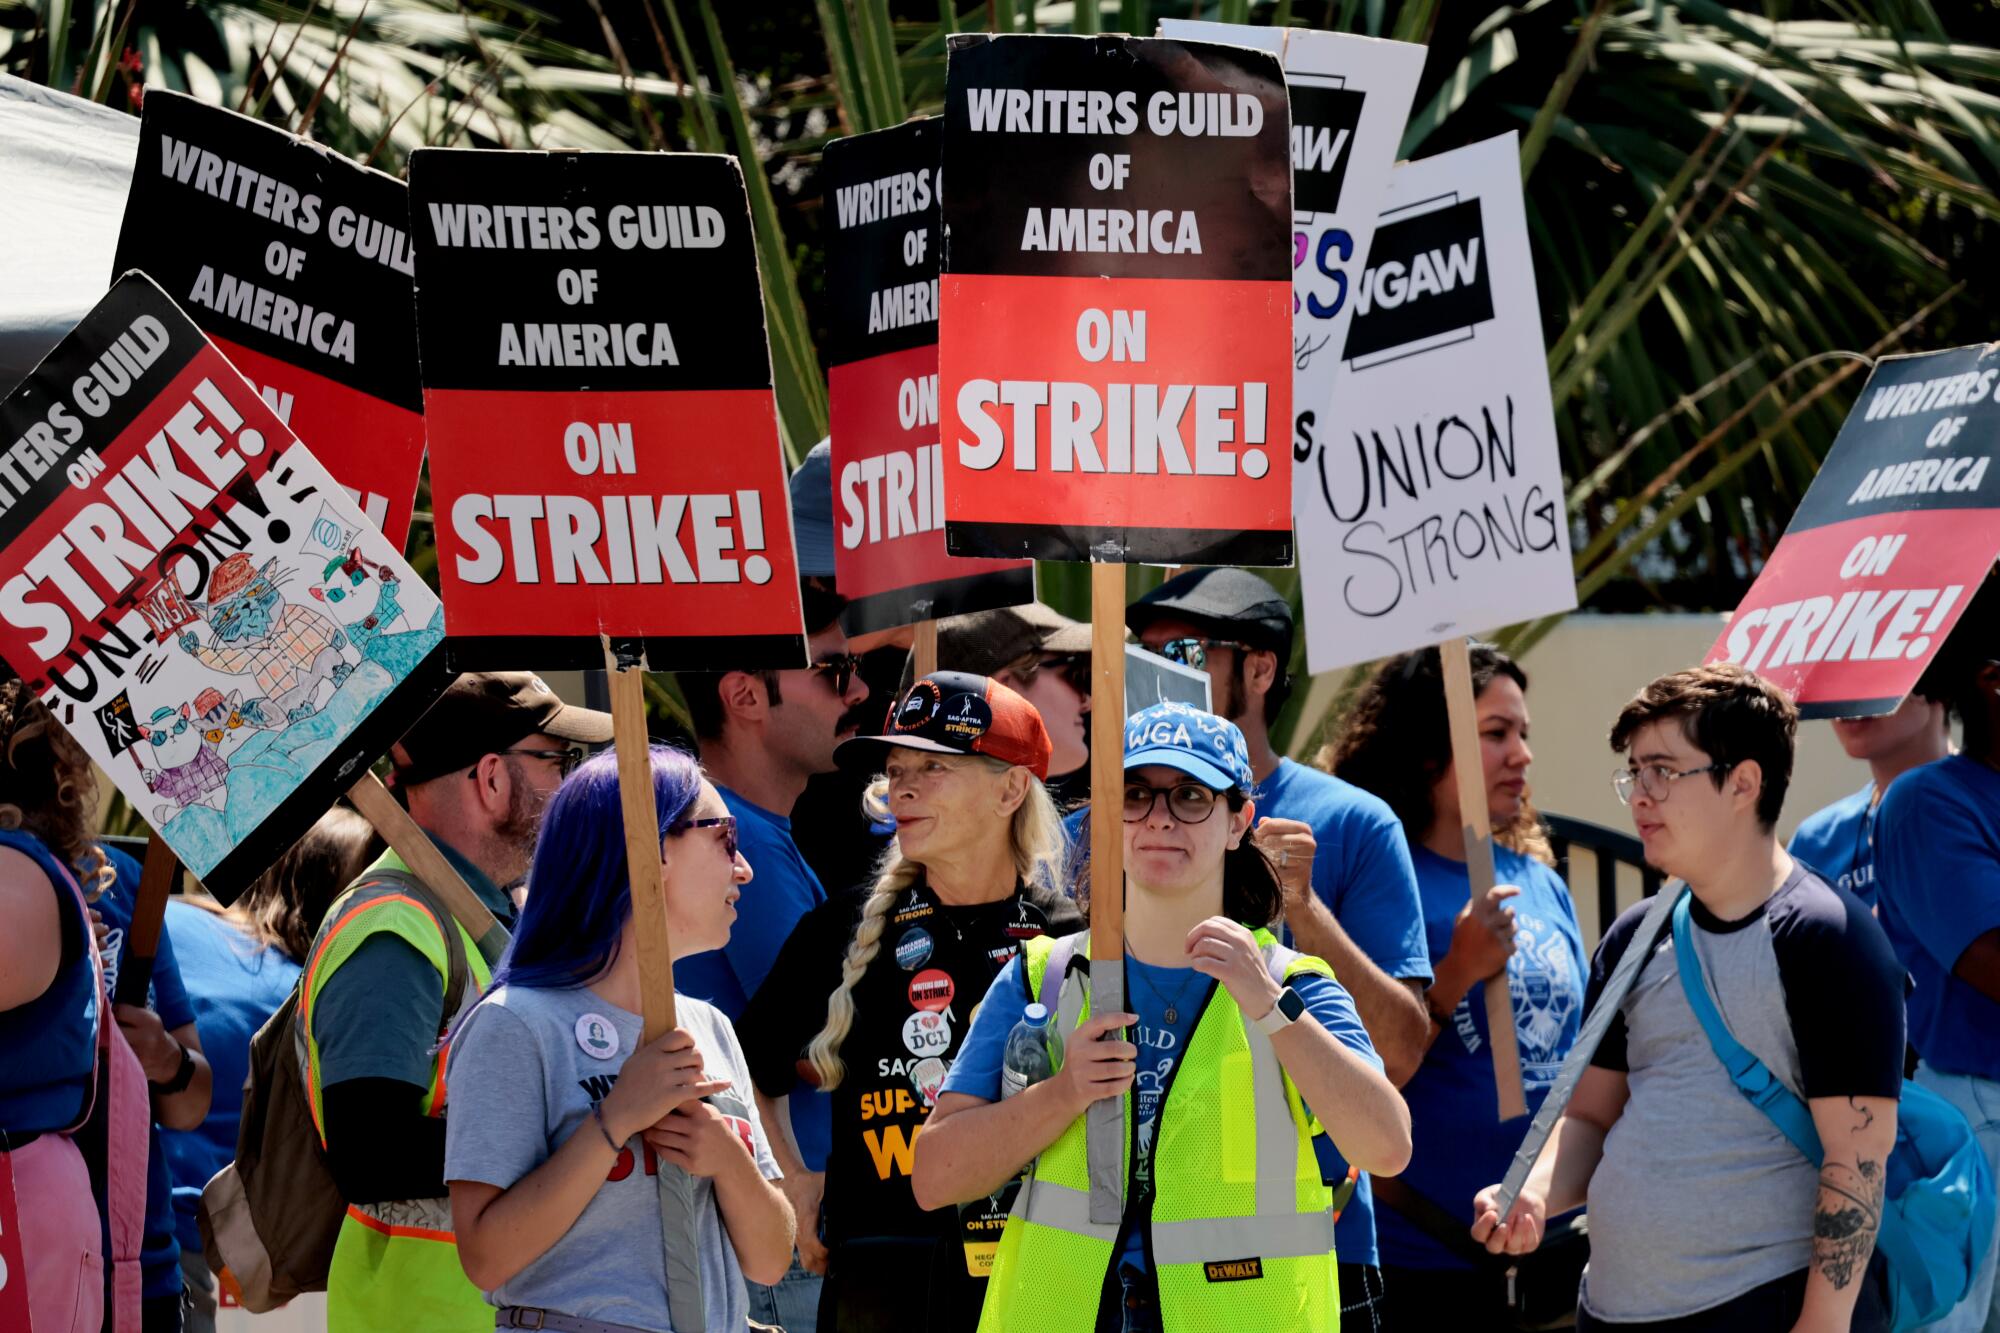 Workers holding picket signs that read "Writers Guild of America on Strike" and "Union Strong."